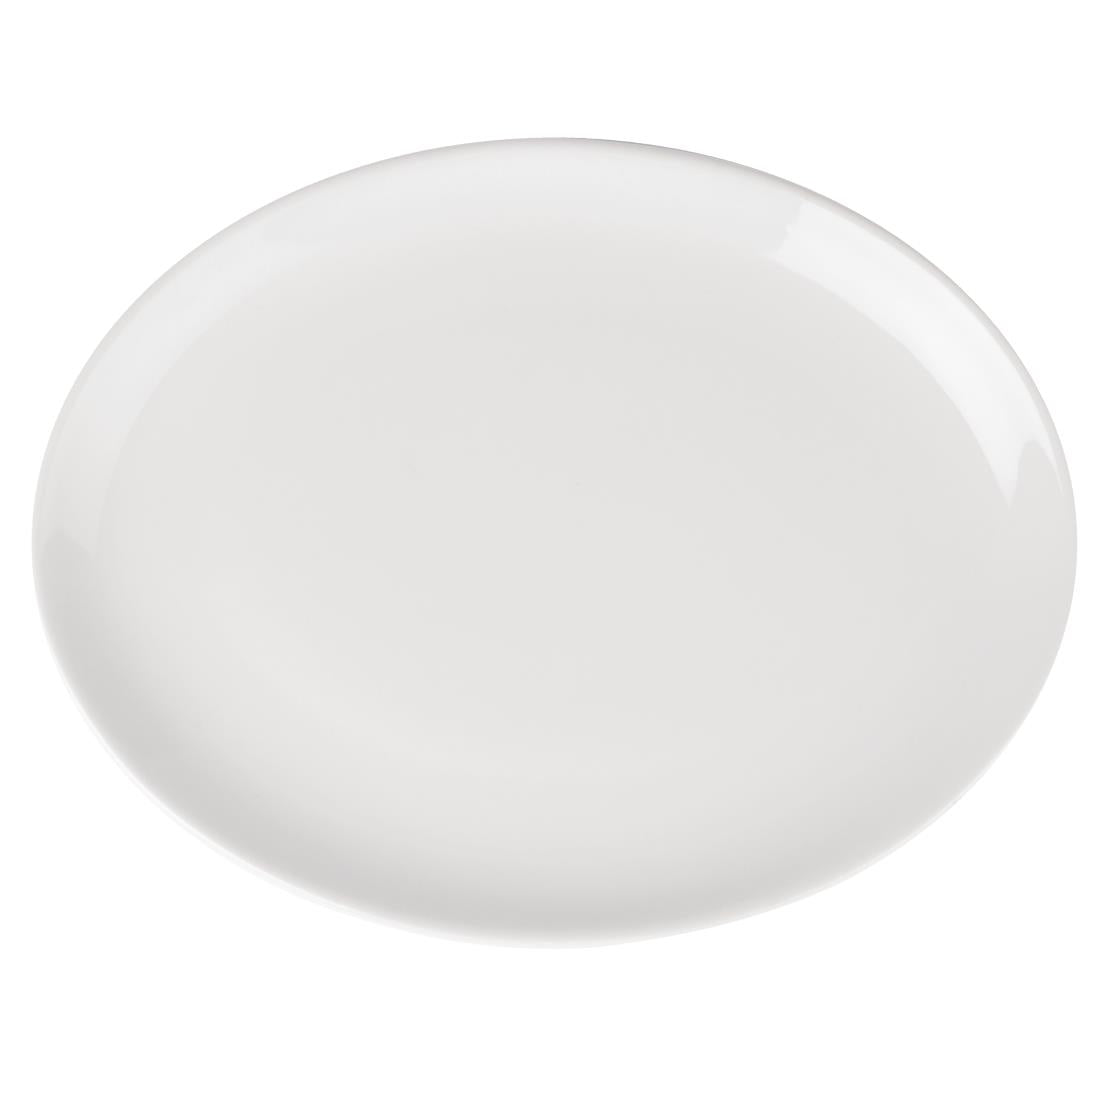 Athena Hotelware Oval Coupe Plates 254 x 197 mm (Pack of 12) JD Catering Equipment Solutions Ltd